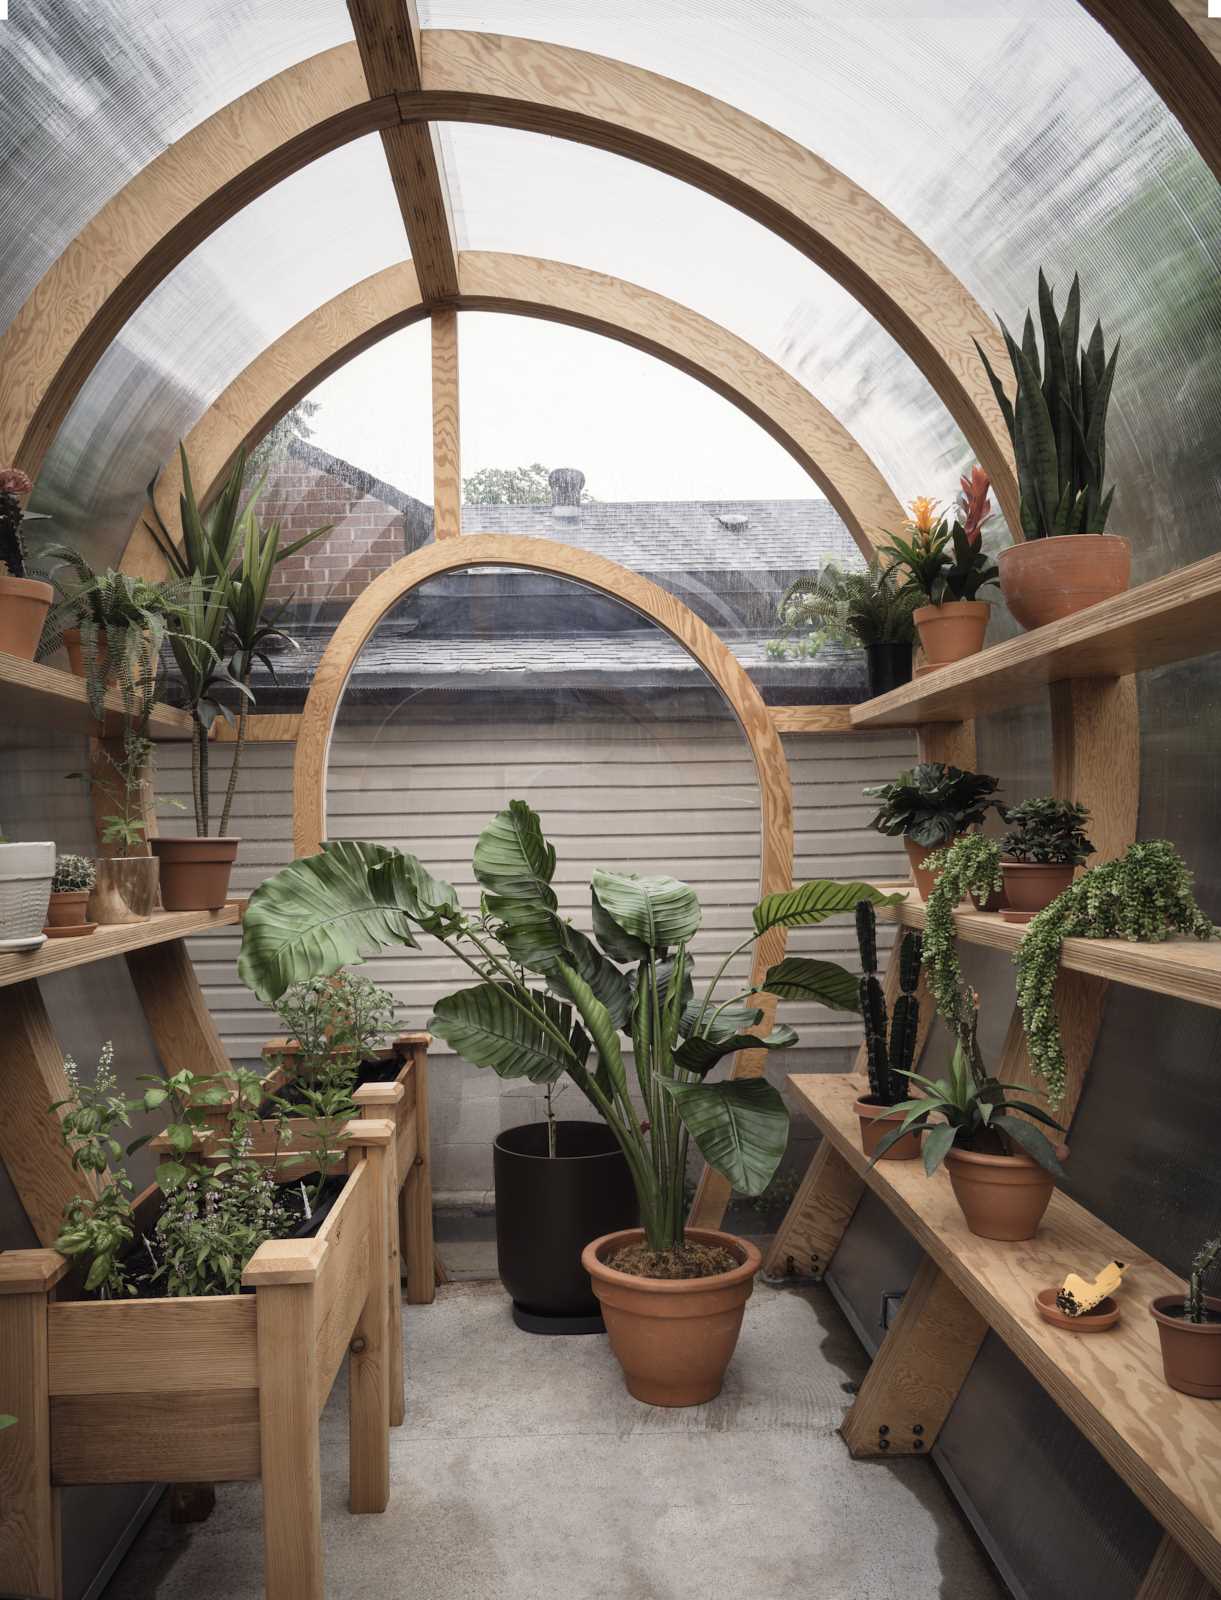 A modern and modular greenhouse design with a curved shape.